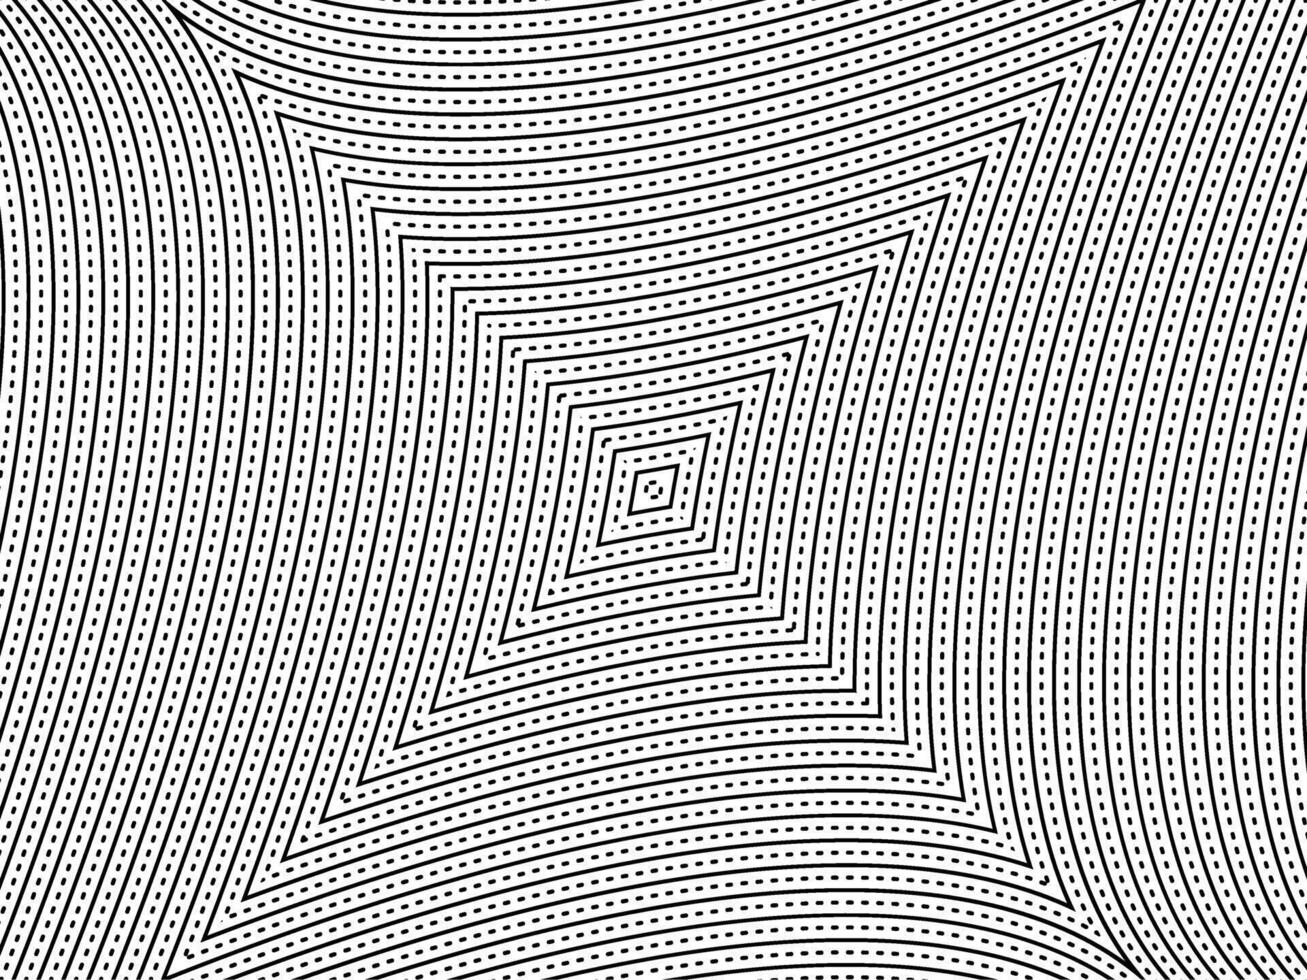 Optical Illusion Created from Artistic Lines Motifs Pattern, can use for Decoration, Background, Ornate, Fabric, Fashion, Textile, Carpet Pattern, Tile or Graphic Design Element vector